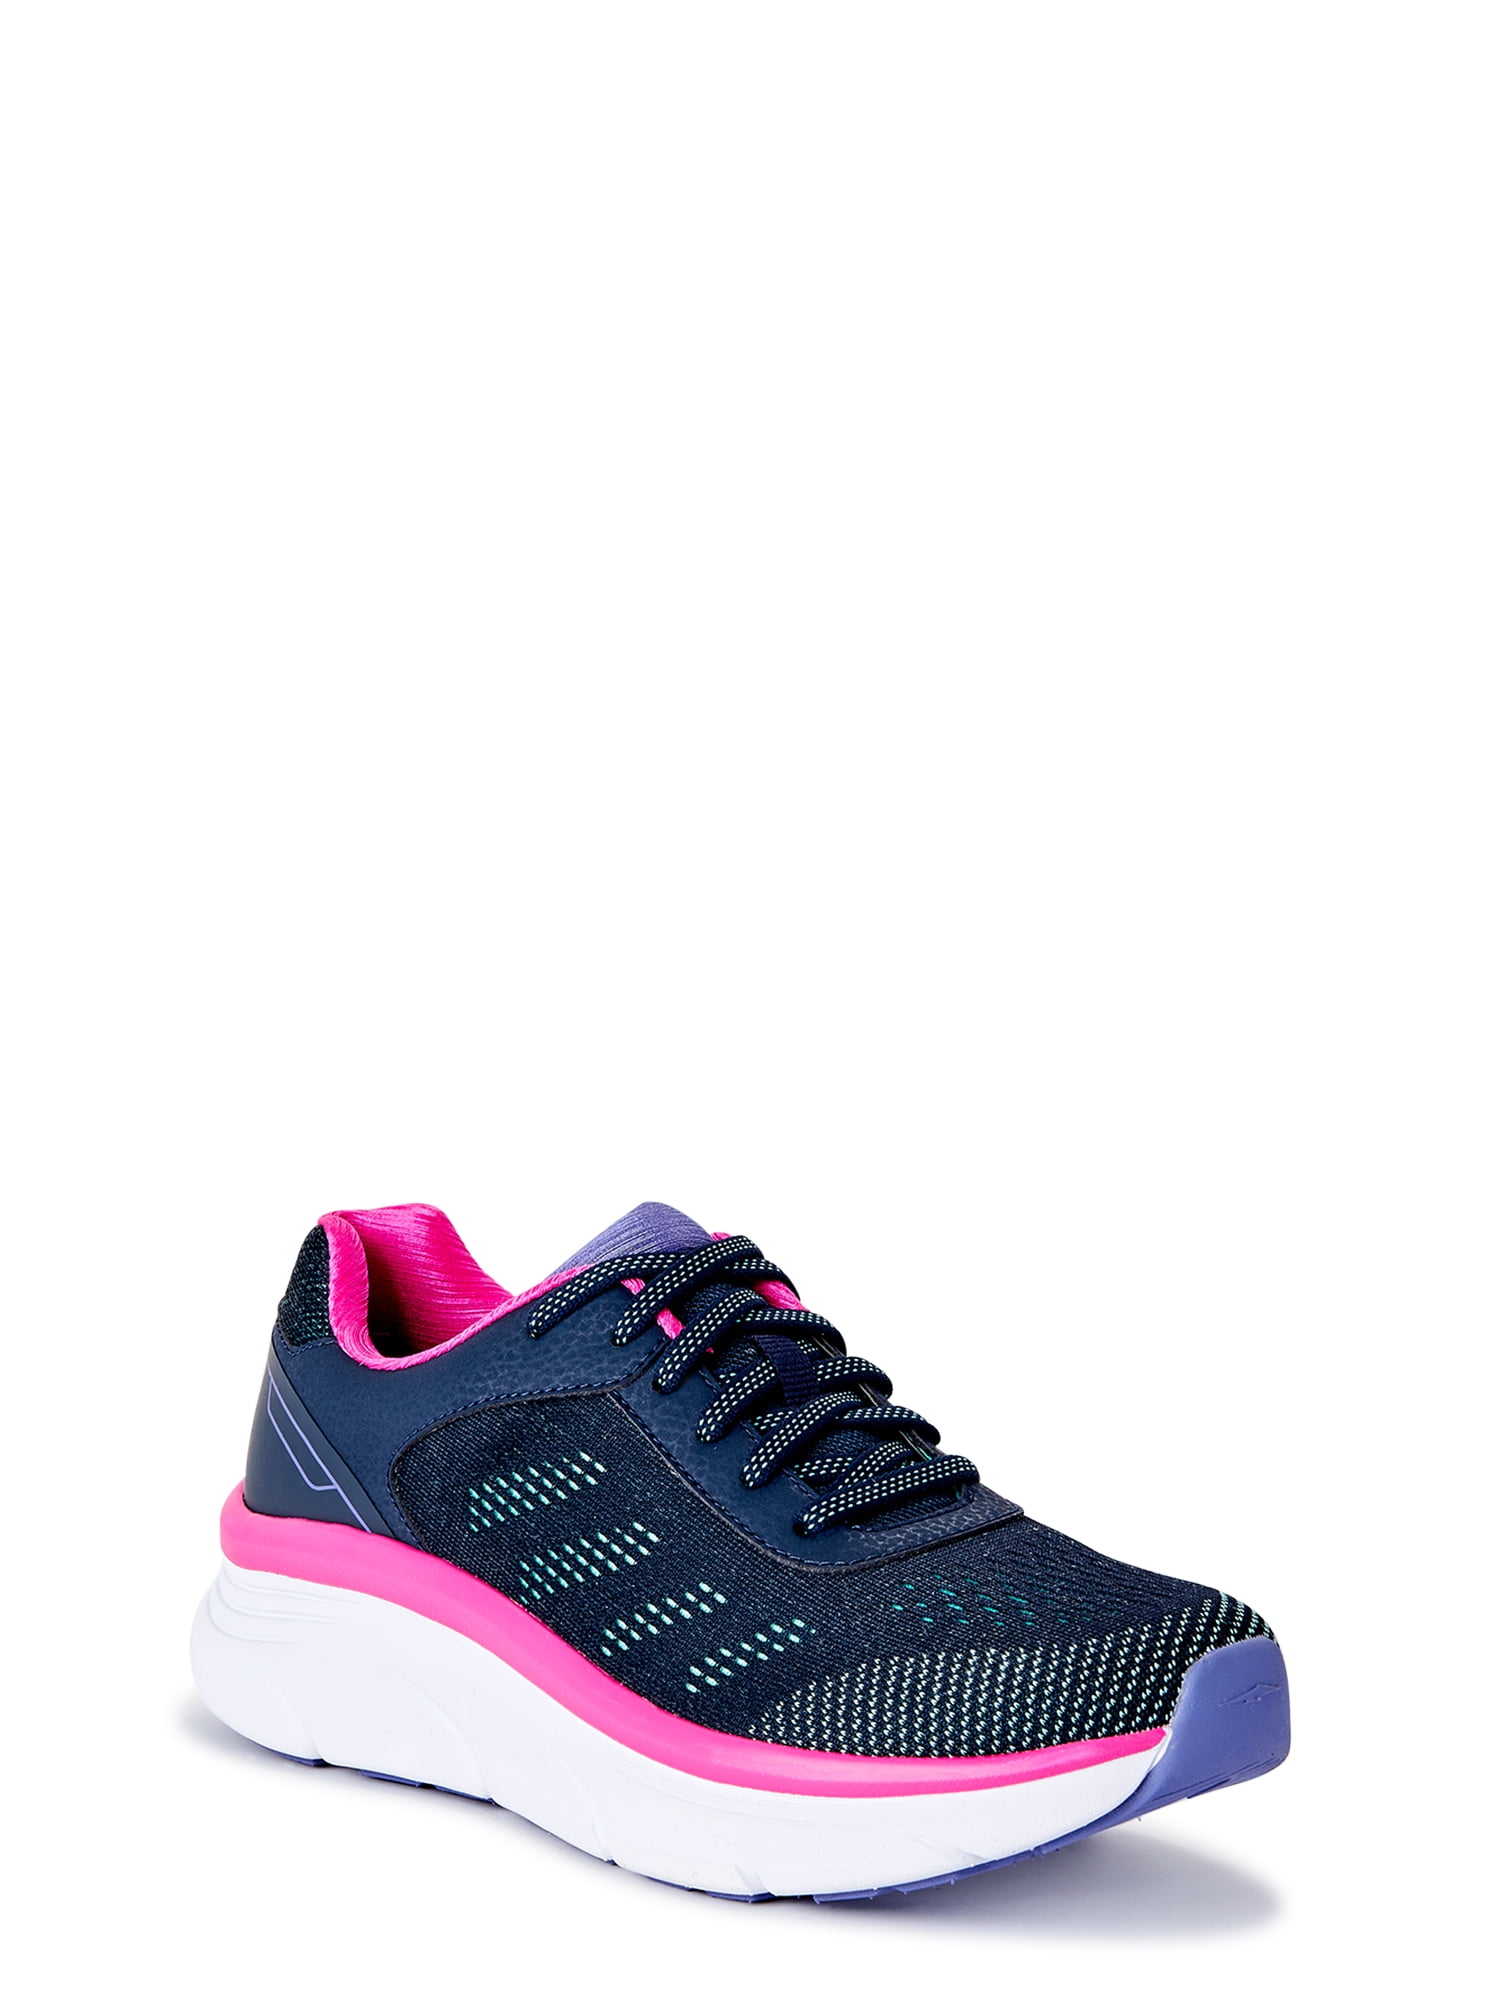 Womens Go Walking Lace Up Trainers Navy Teal Pink Light Weight Shoes 